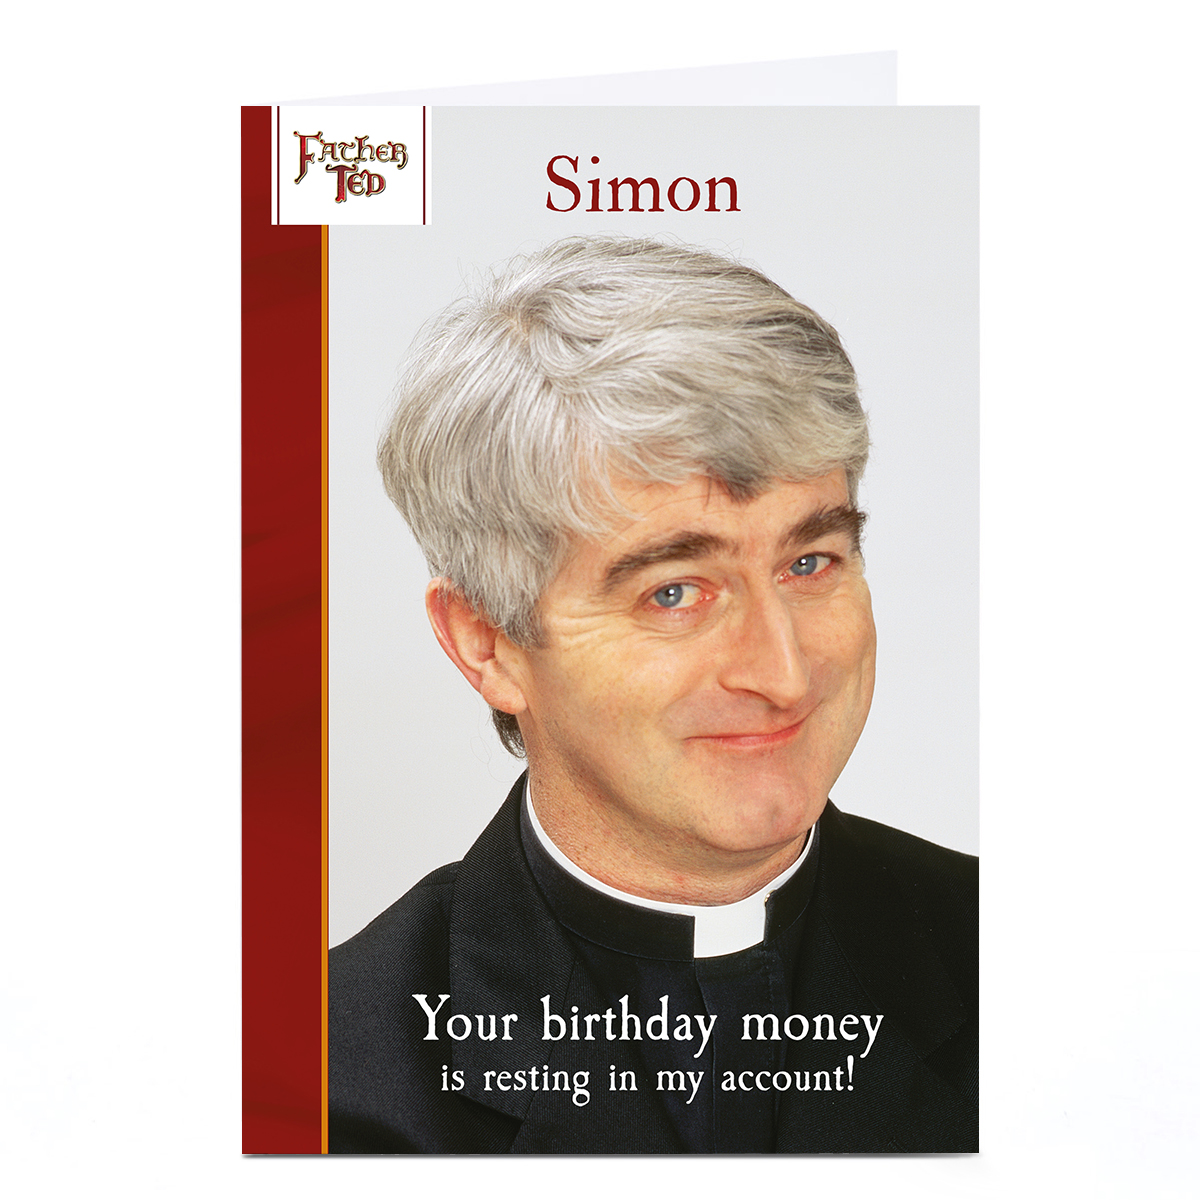 Personalised Father Ted Birthday Card - Birthday Money